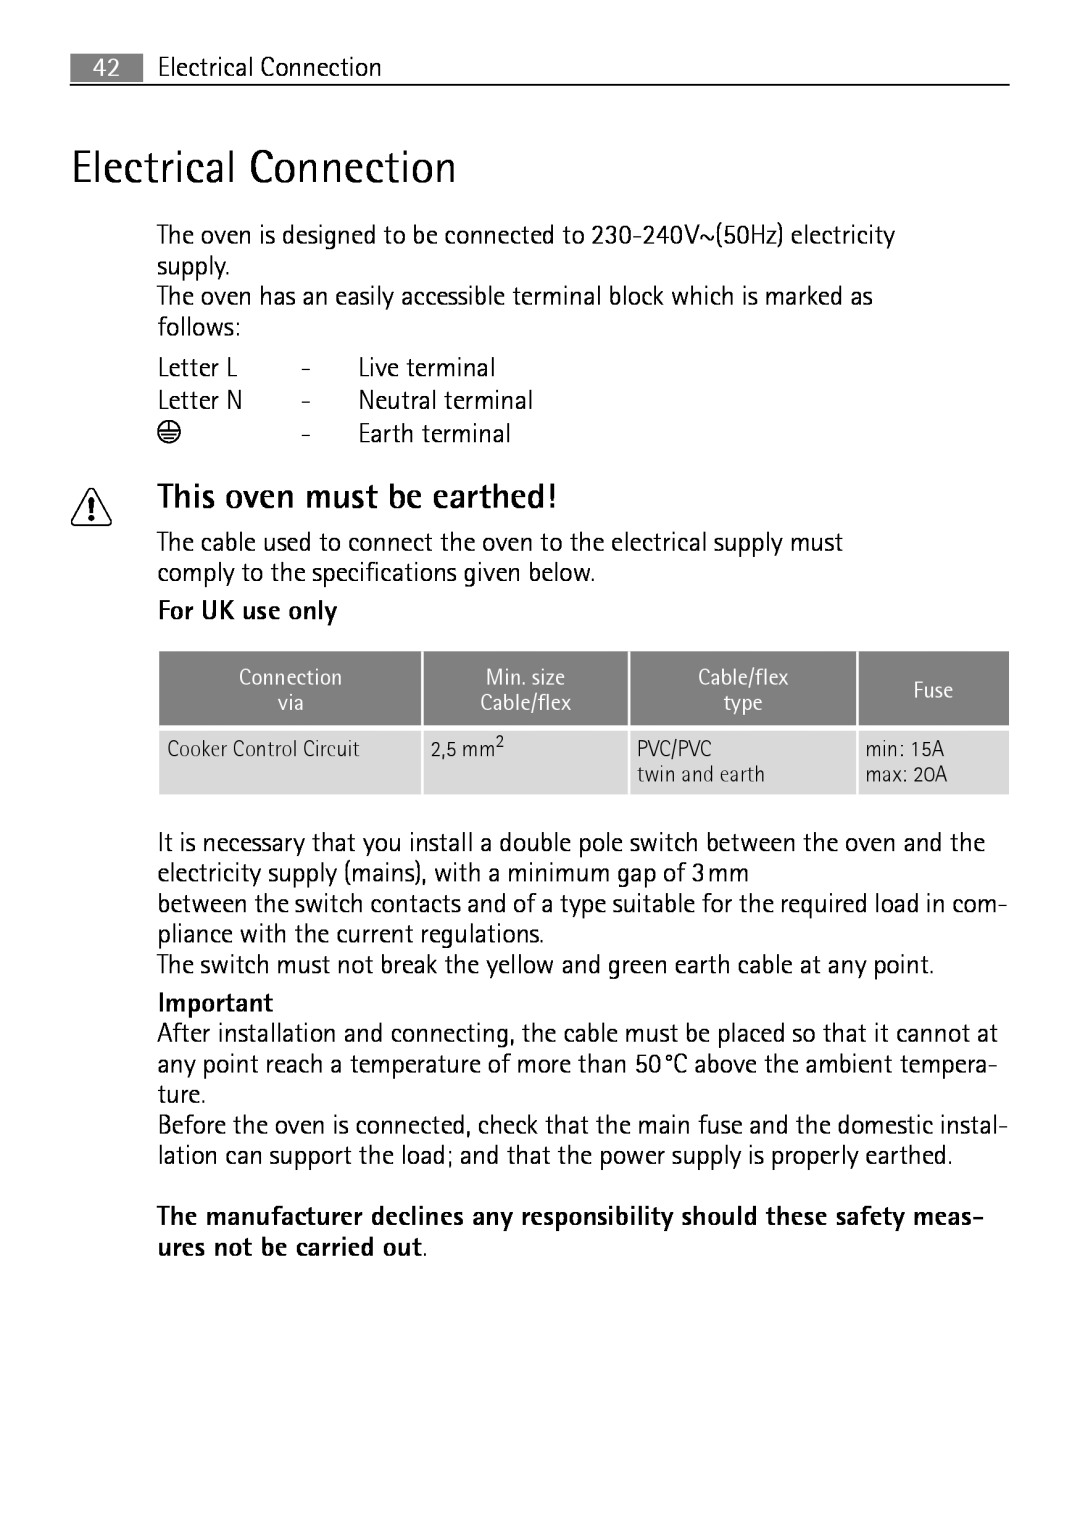 Electrolux B2100-5 user manual Electrical Connection, This oven must be earthed, For UK use only 